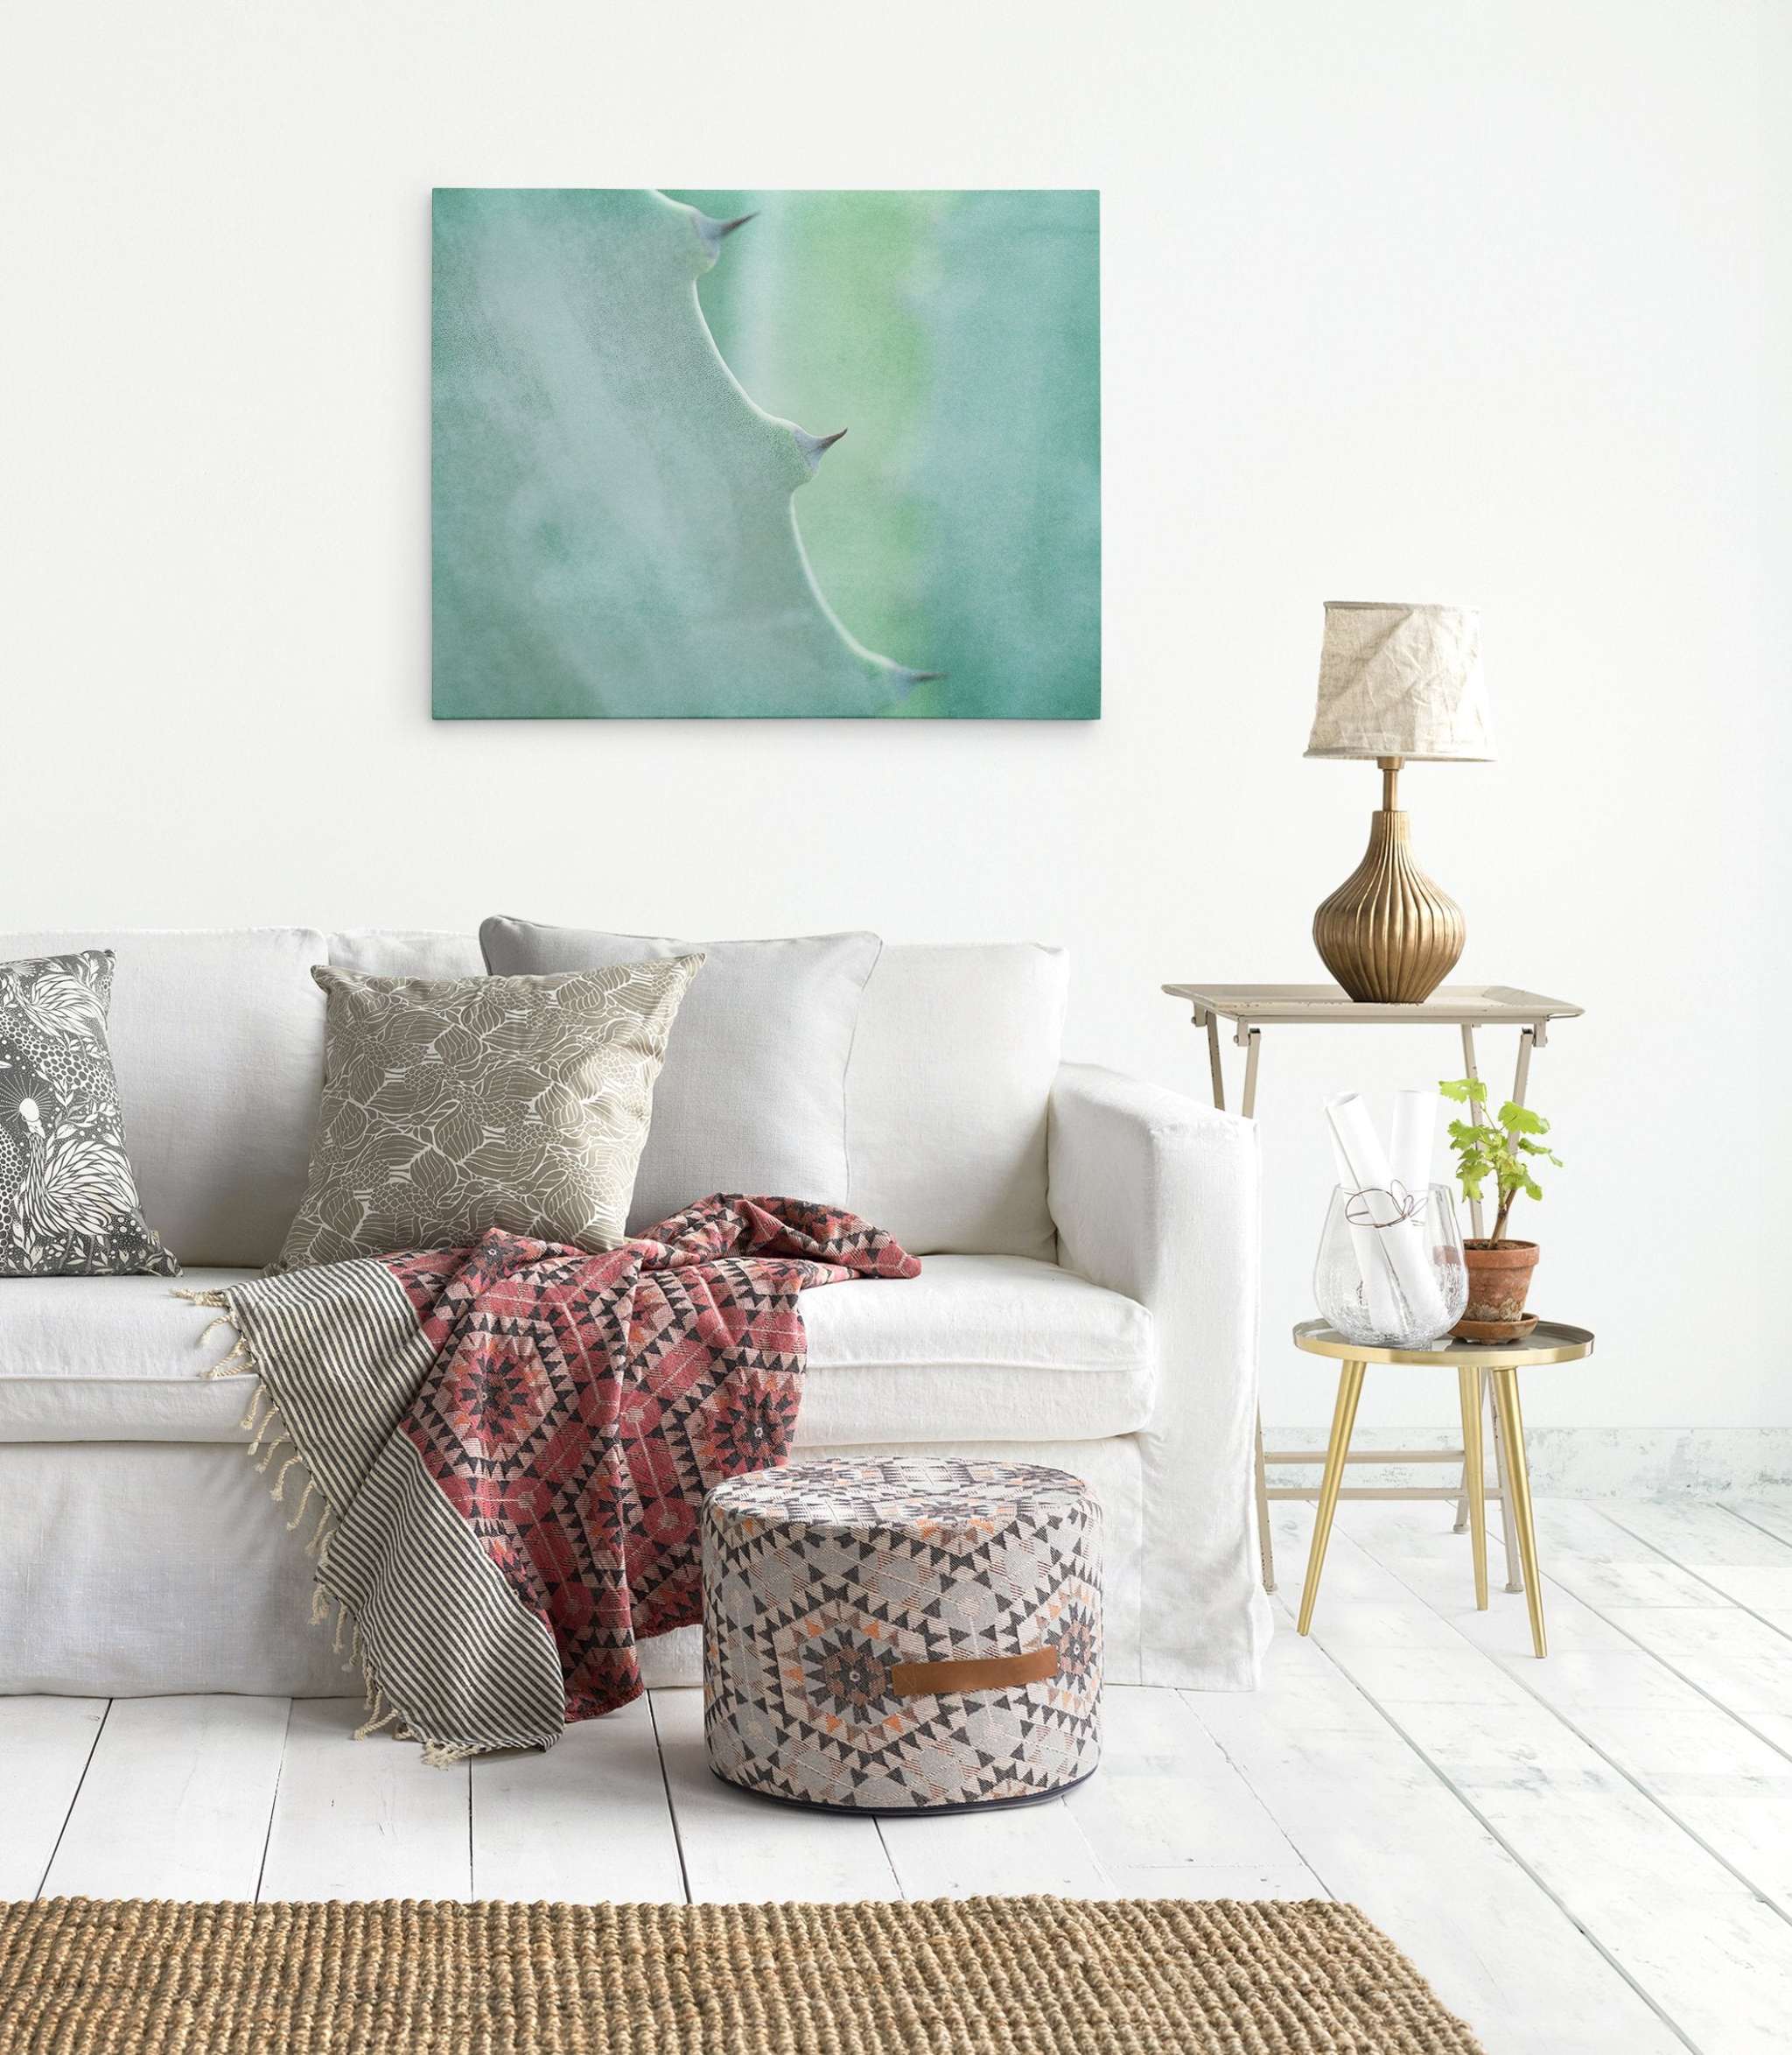 A bright and airy living room features a white sofa adorned with patterned cushions and a red geometric throw. A stylish pouf sits nearby. A side table holds a lamp, a glass pitcher, and an Aloe Vera plant. Offley Green&#39;s Mint Green Botanical Wall Art, &#39;Aloe Vera Spikes&#39; on premium artist-grade canvas hangs on the wall. Light wooden flooring.